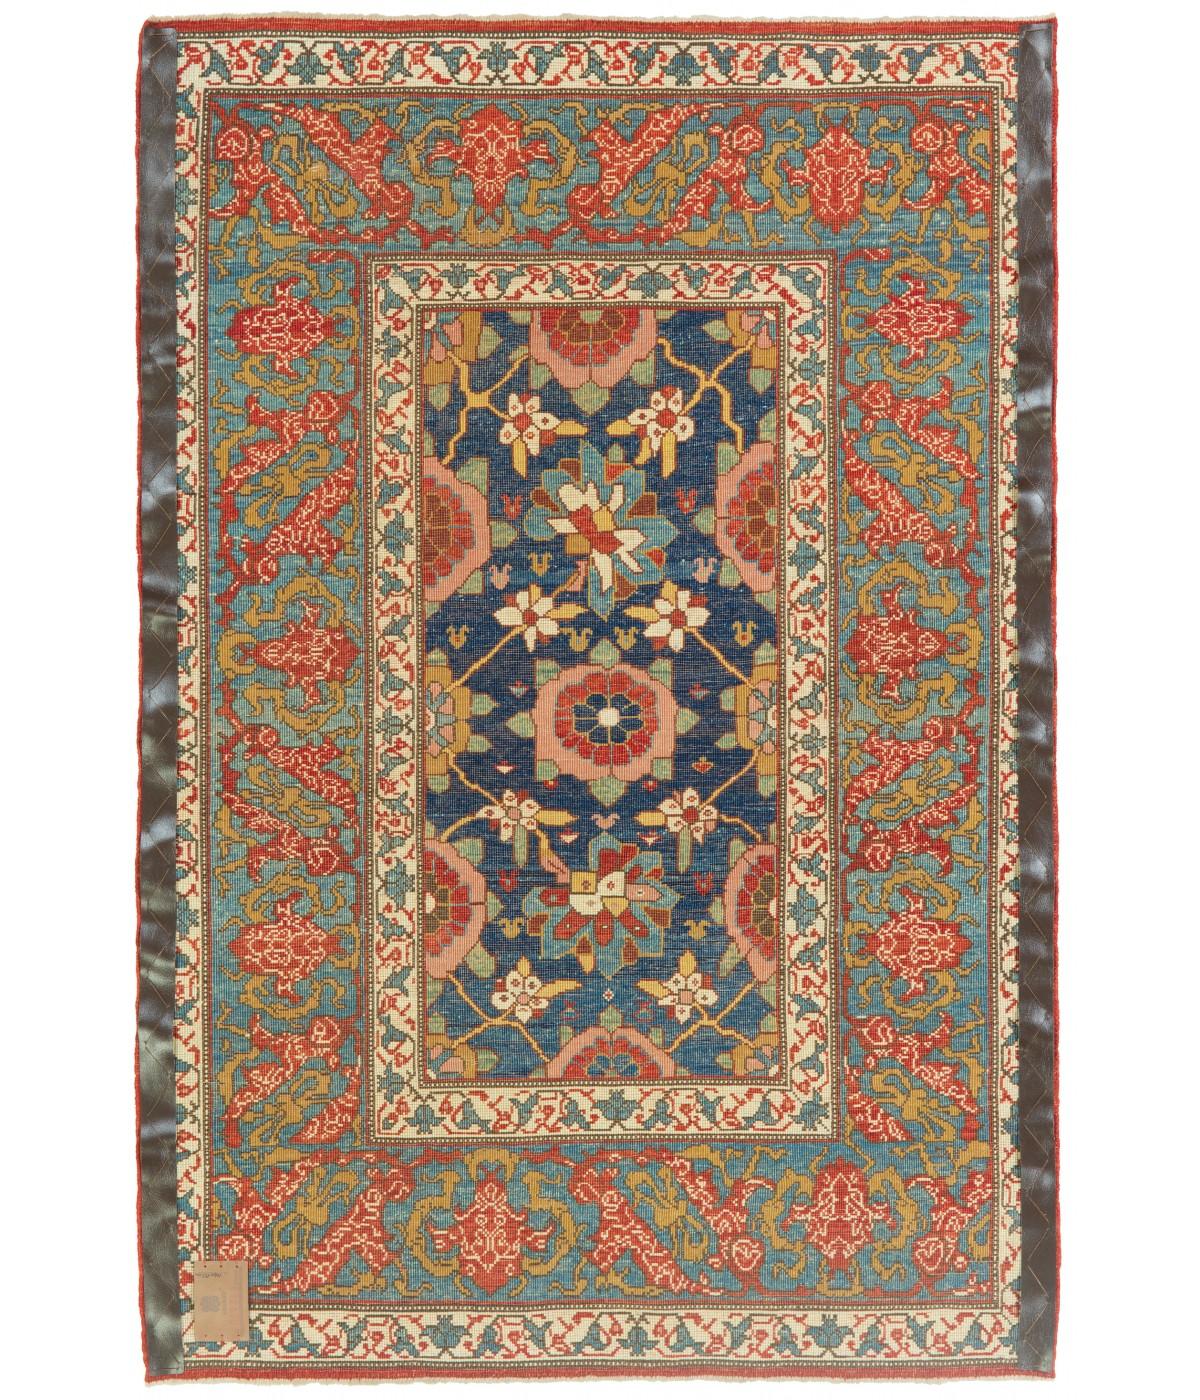 The design source of the rug comes from the book Antique Rugs of Kurdistan A Historical Legacy of Woven Art, James D. Burns, 2002 nr.4. This was an exclusive example of a Mina Khani lattice design mid-19th century rug from Koliya'i, Southern